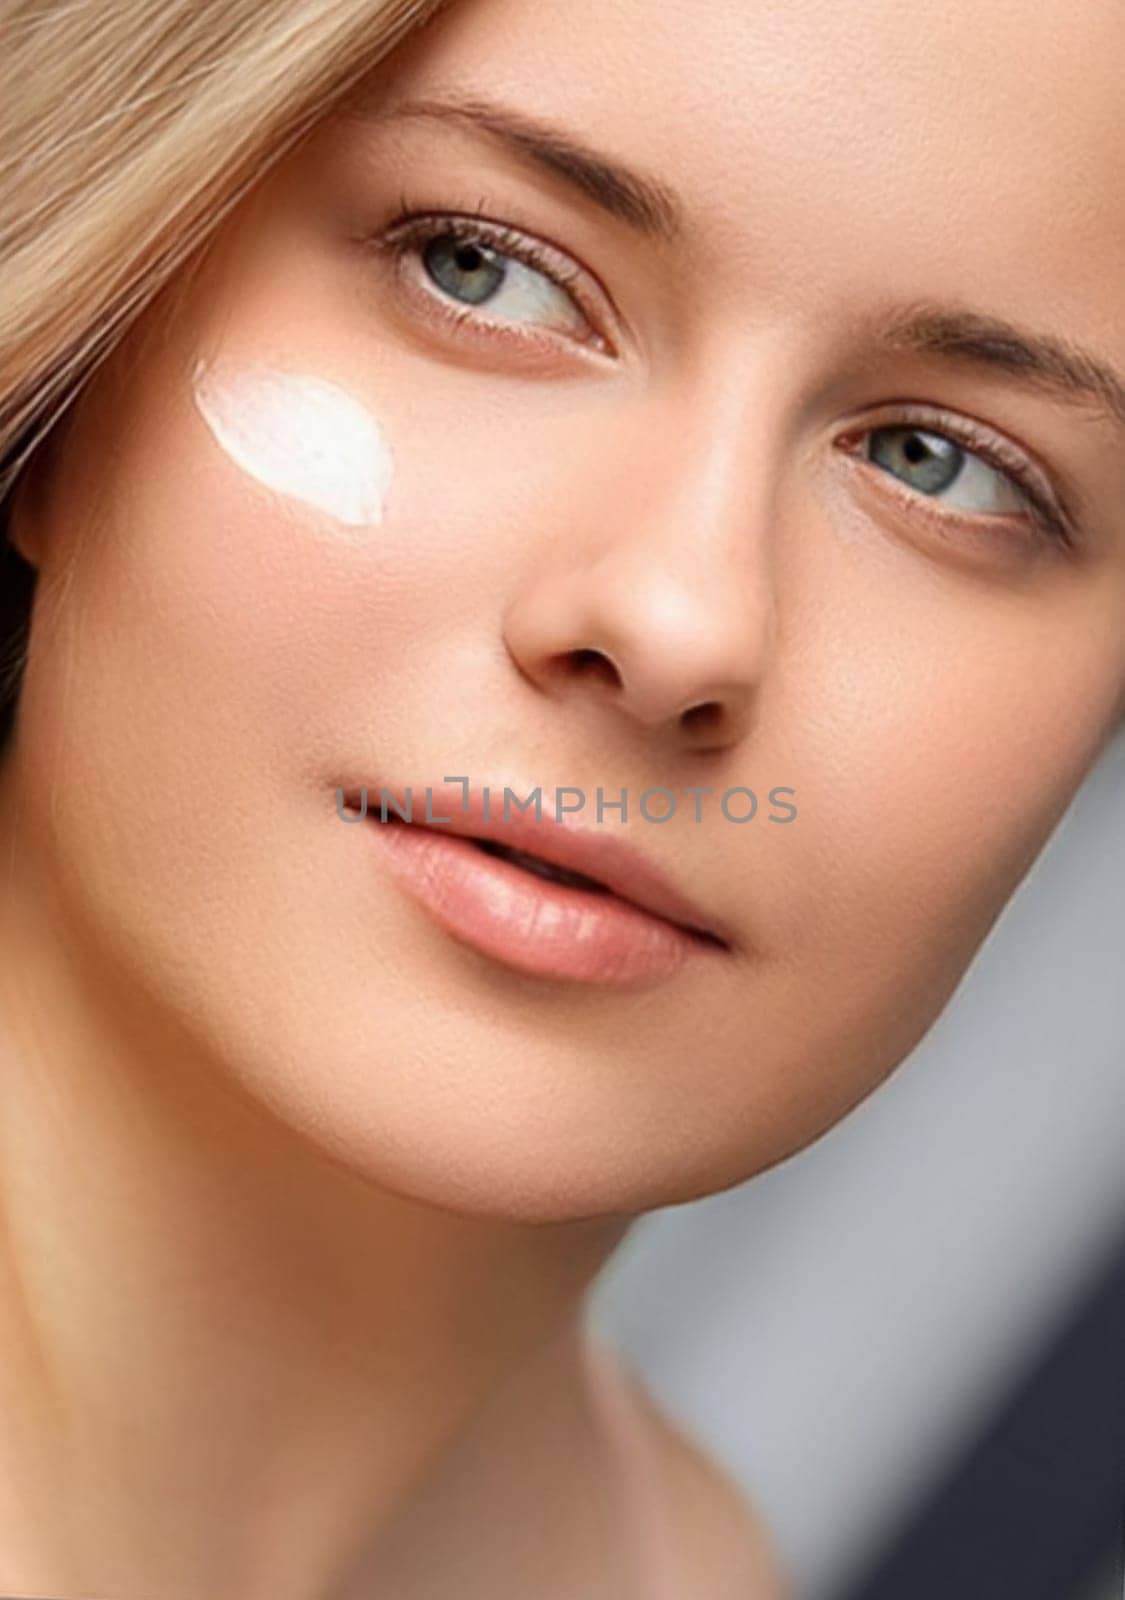 Beauty, suntan spf and skincare cosmetics model face portrait, woman with moisturising cream, sunscreen product or sun tan lotion on her cheek, luxury facial and skin care by Anneleven